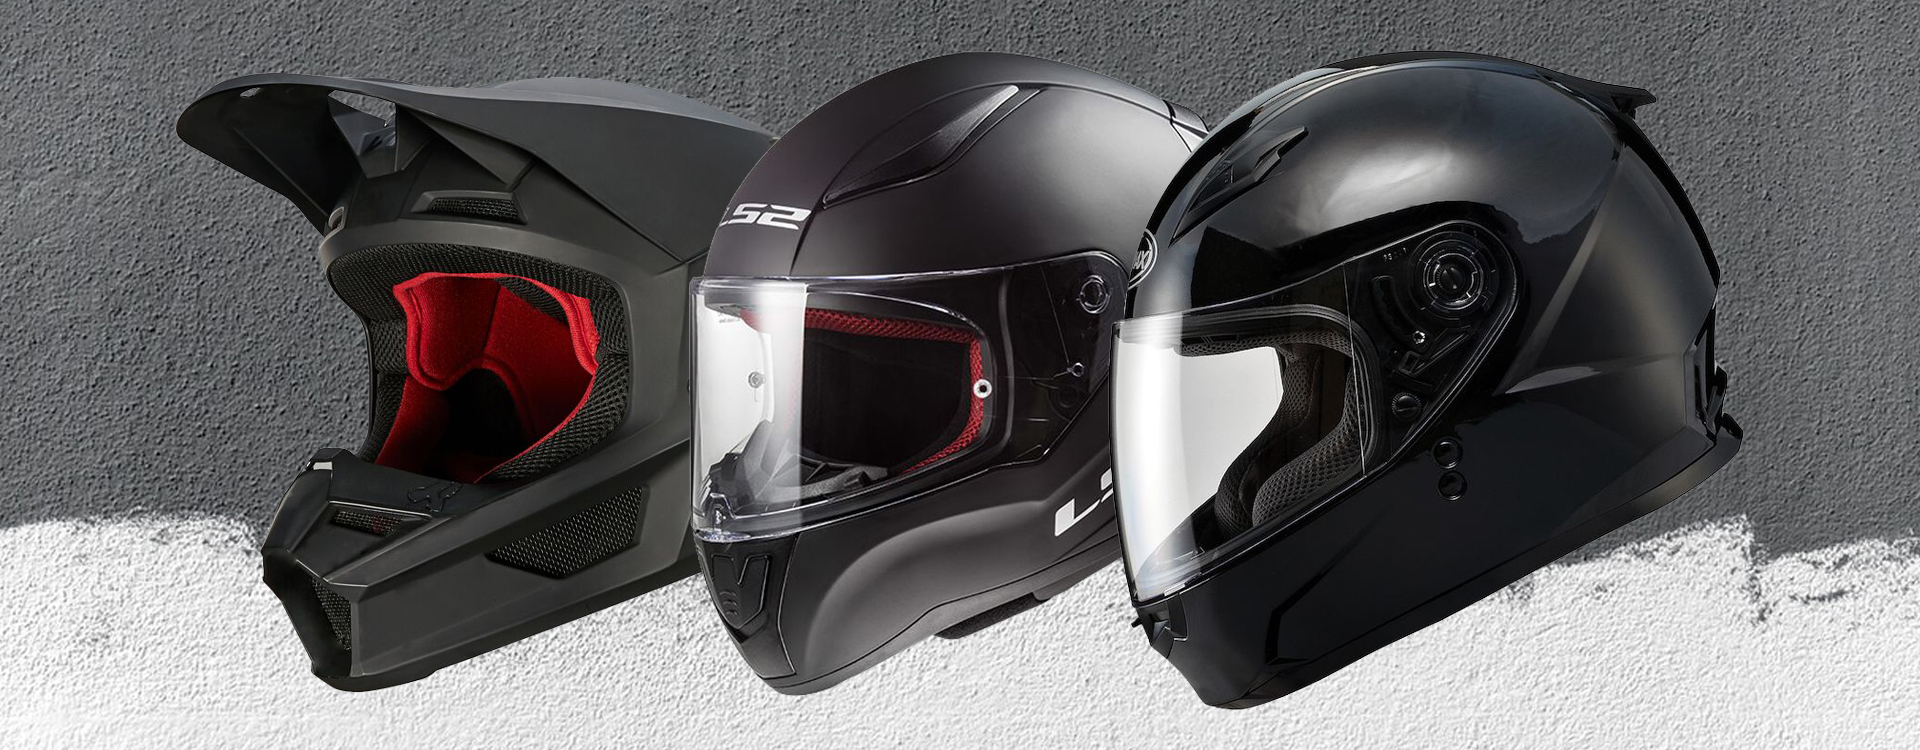 The Best Coolest Motorcycle Helmets For Kids 2021 Edition Bahs